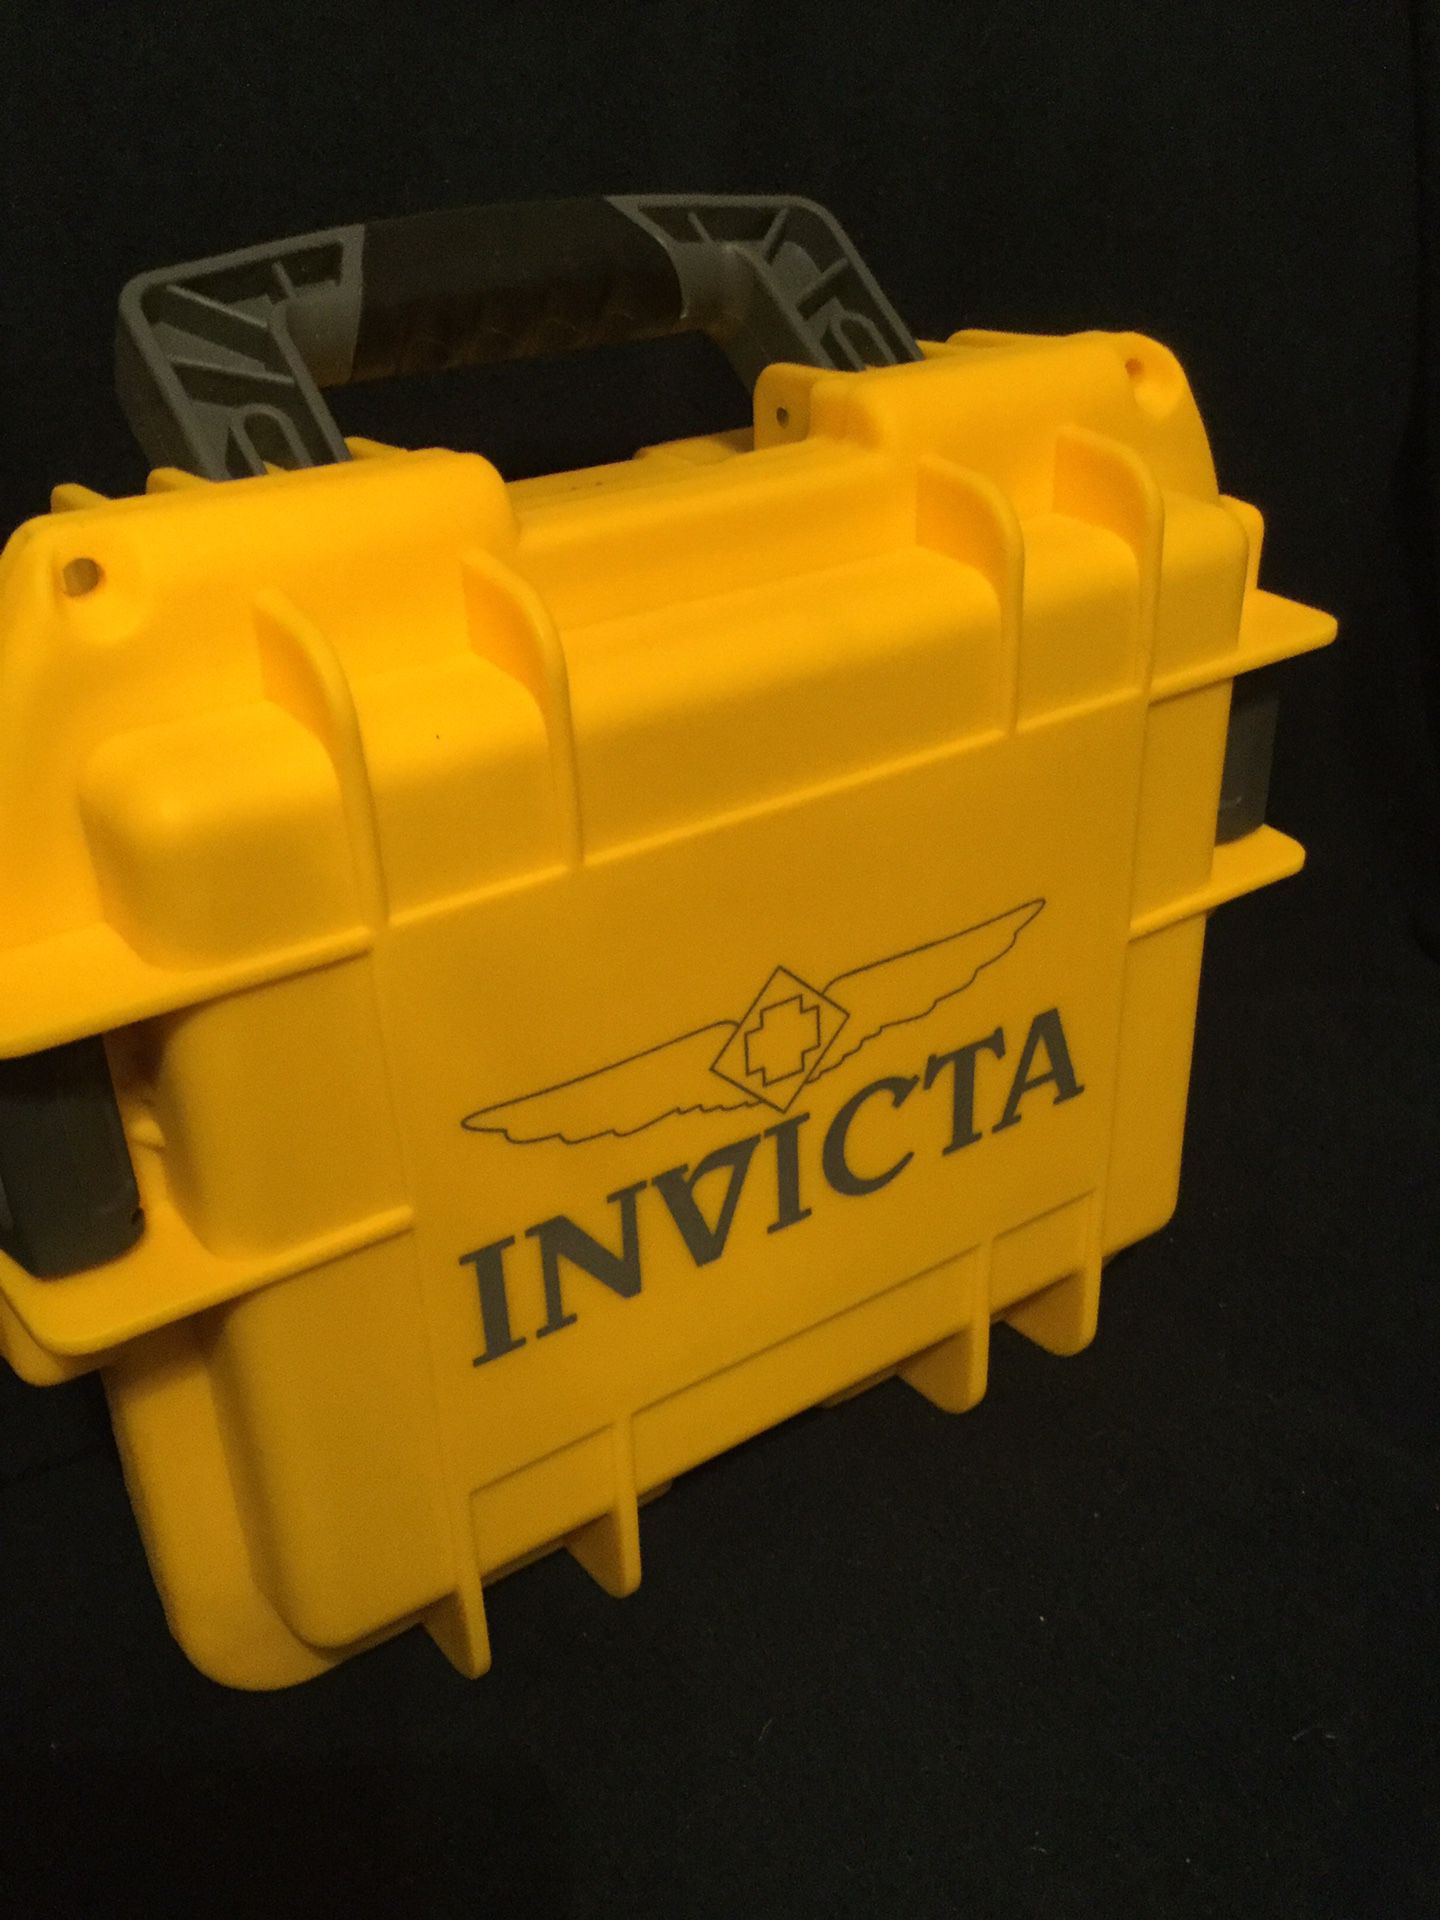 INVICTA 3 SLOT IMPACT RESISTANT WATCH CASE.**ON HOLD PENDING PICK-UP**